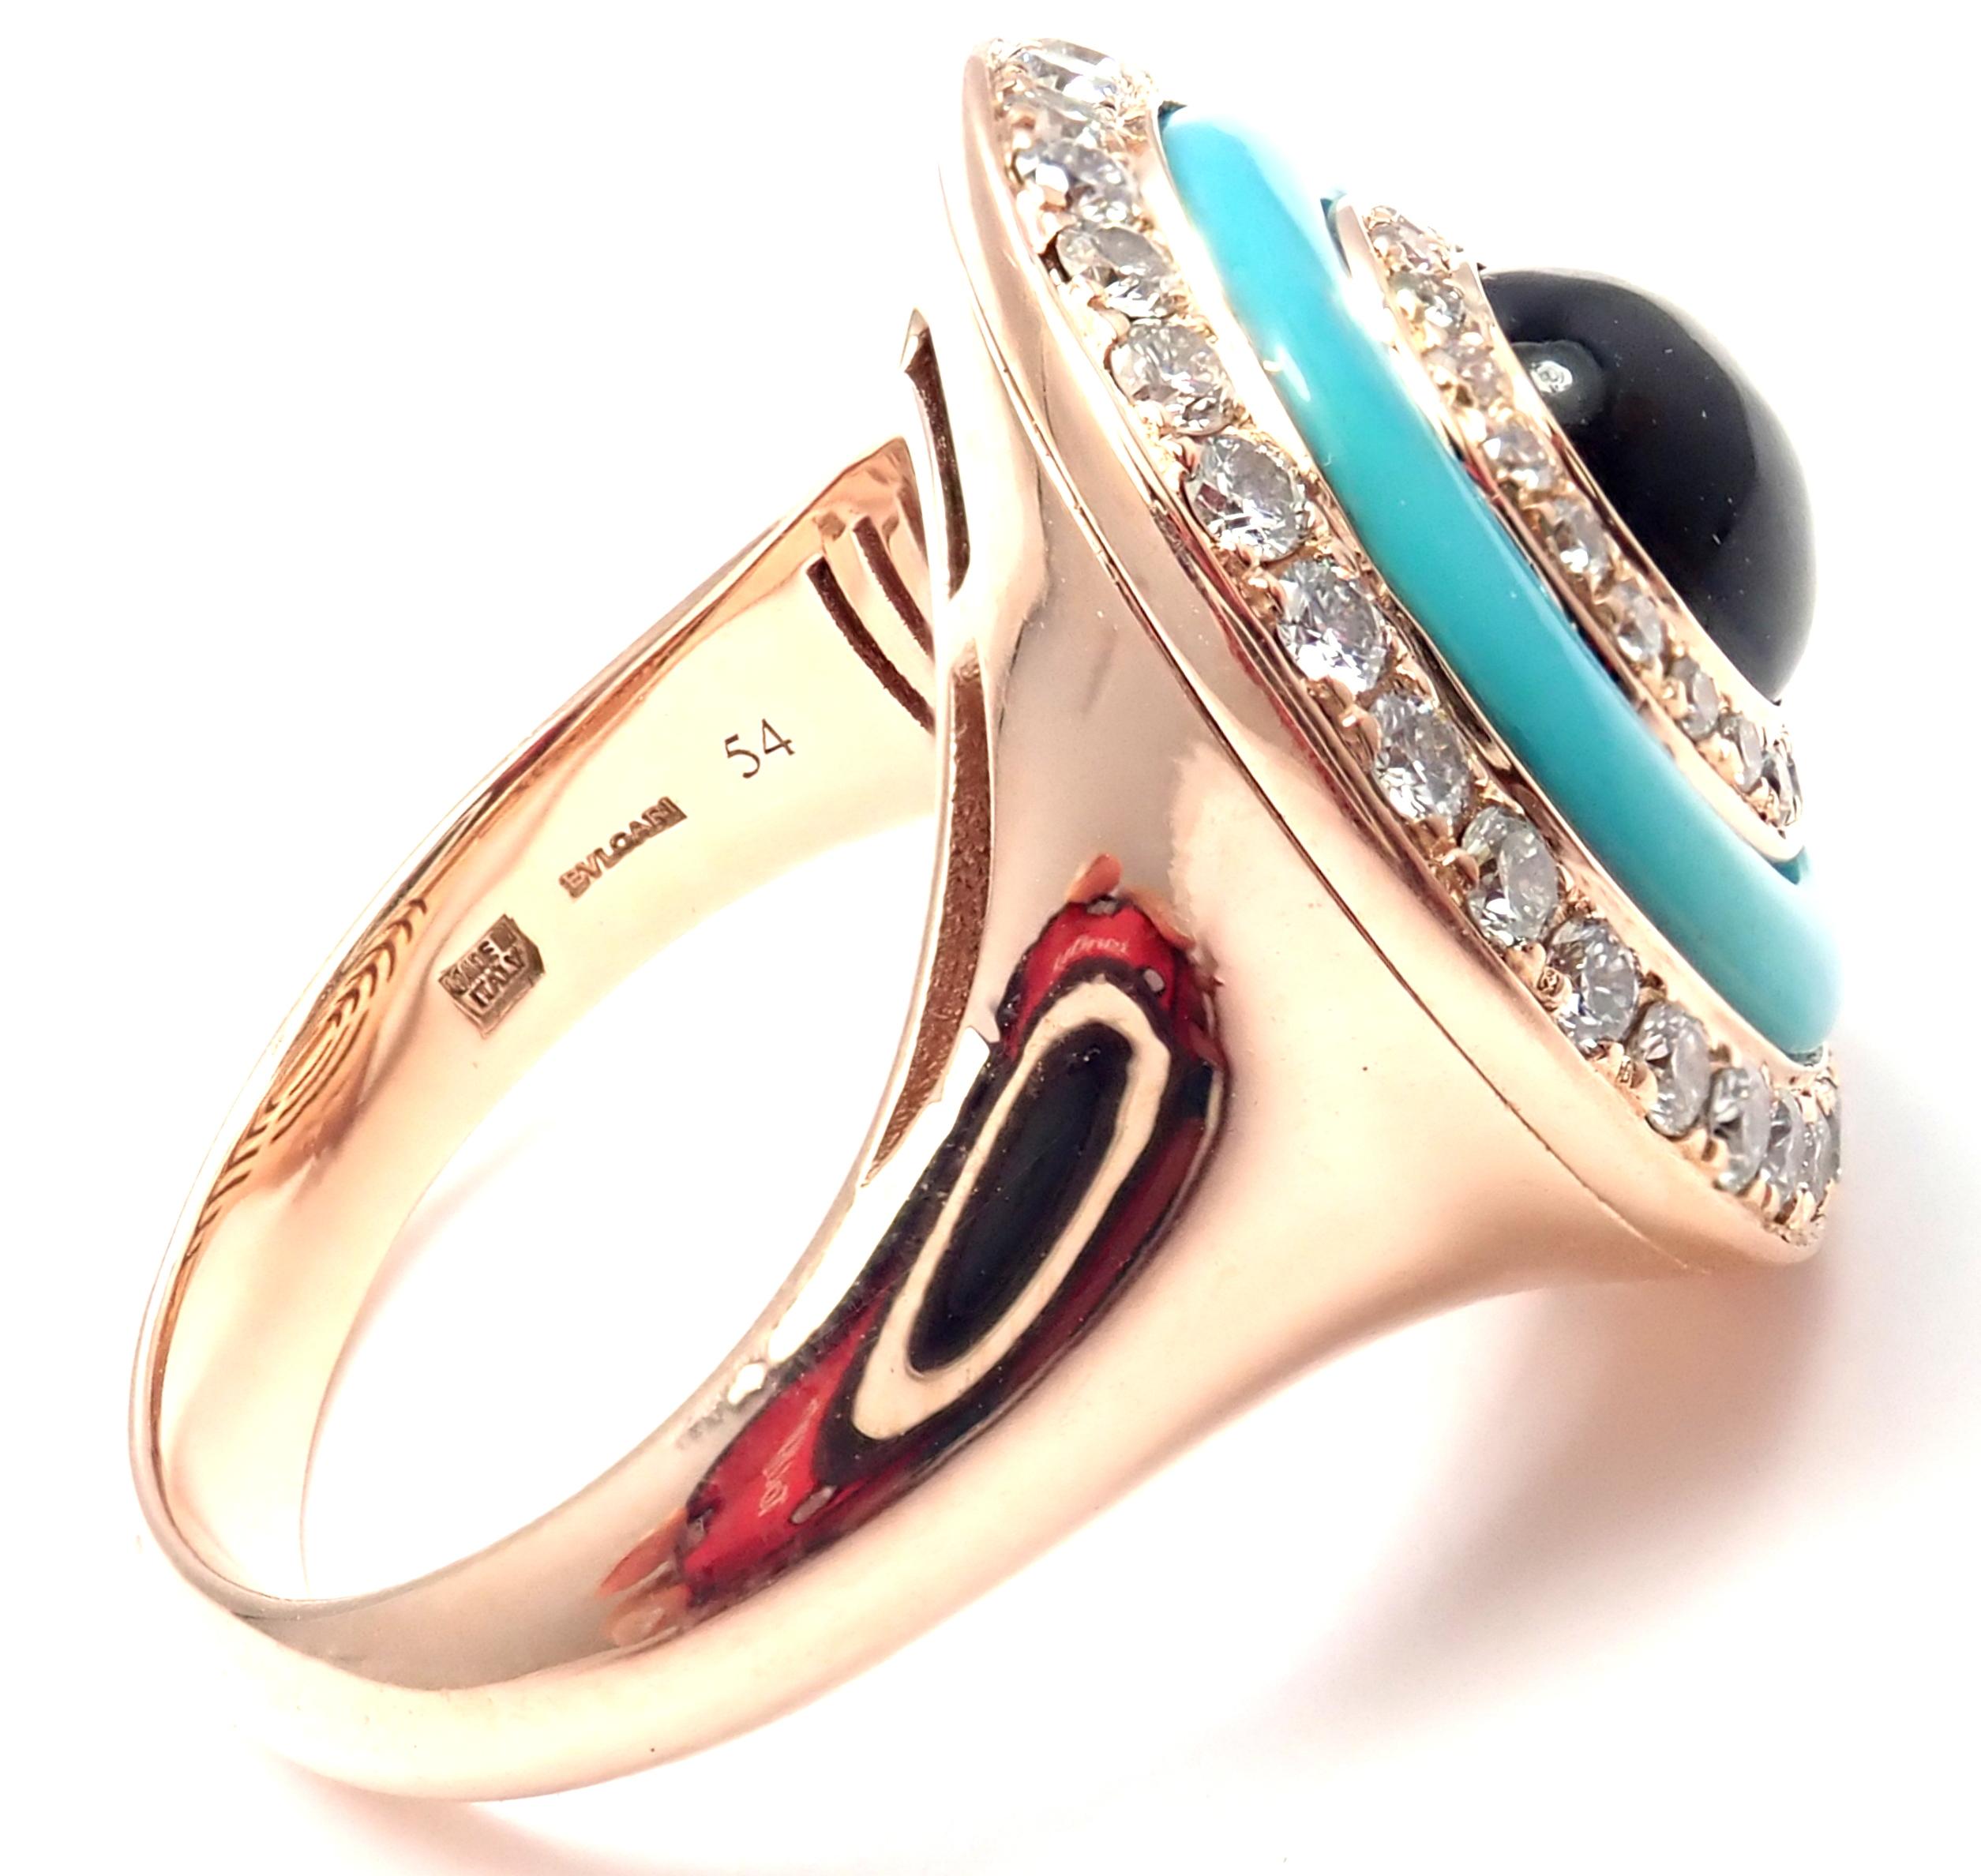 18k Rose Gold Diamond Turquoise Green Tourmaline Ring by Bulgari.  
With 52 round brilliant cut diamonds VS1 clarity E color total weight approx. 1ct
Turquoise 
1 Round Green Tourmaline
Details: European 54, US 6 3/4
Width: 20mm
Weight: 13.3